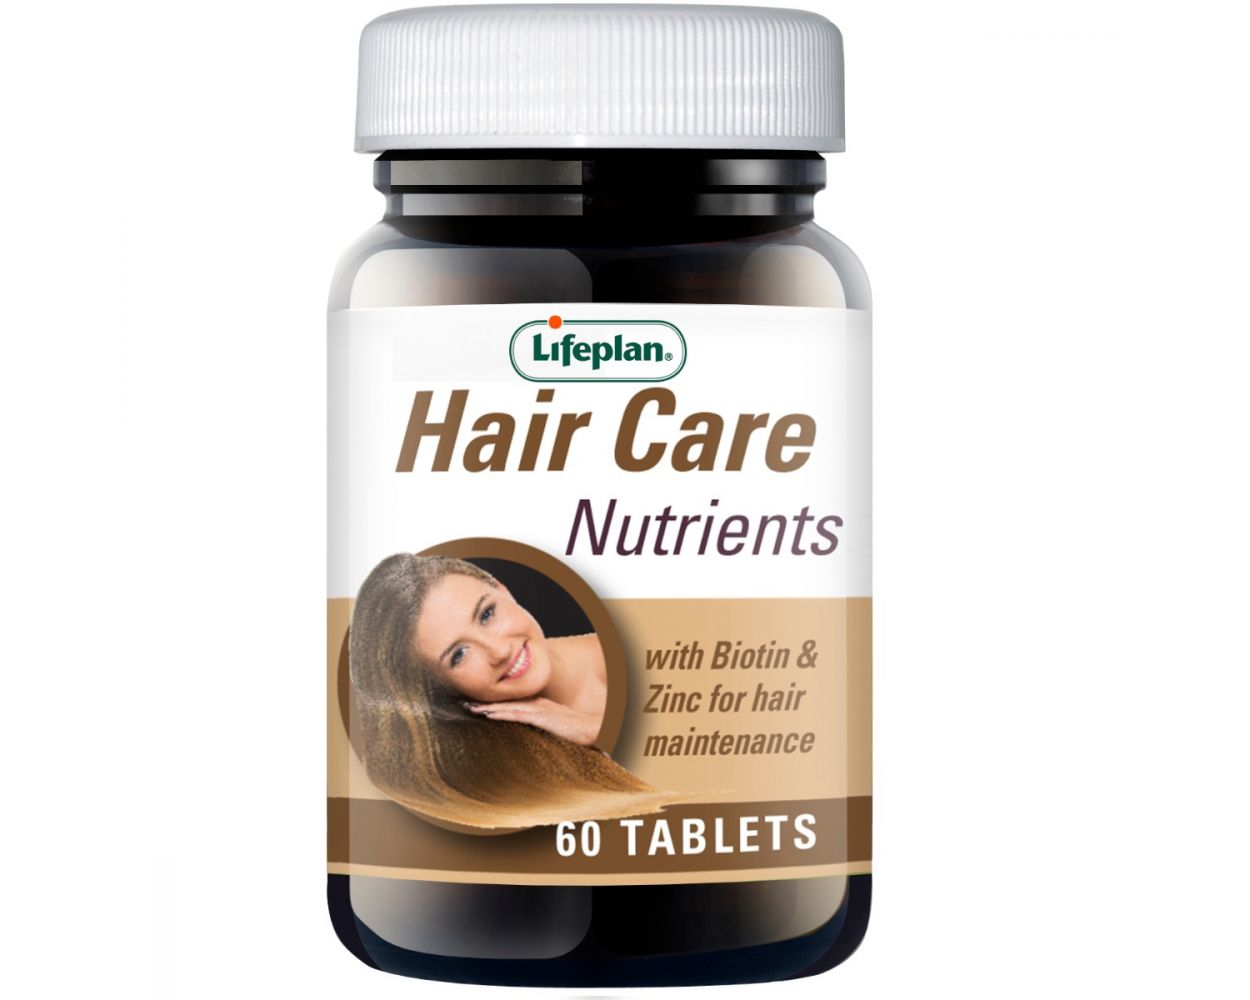 Lifeplan Haircare Nutrients (60 Tablets)